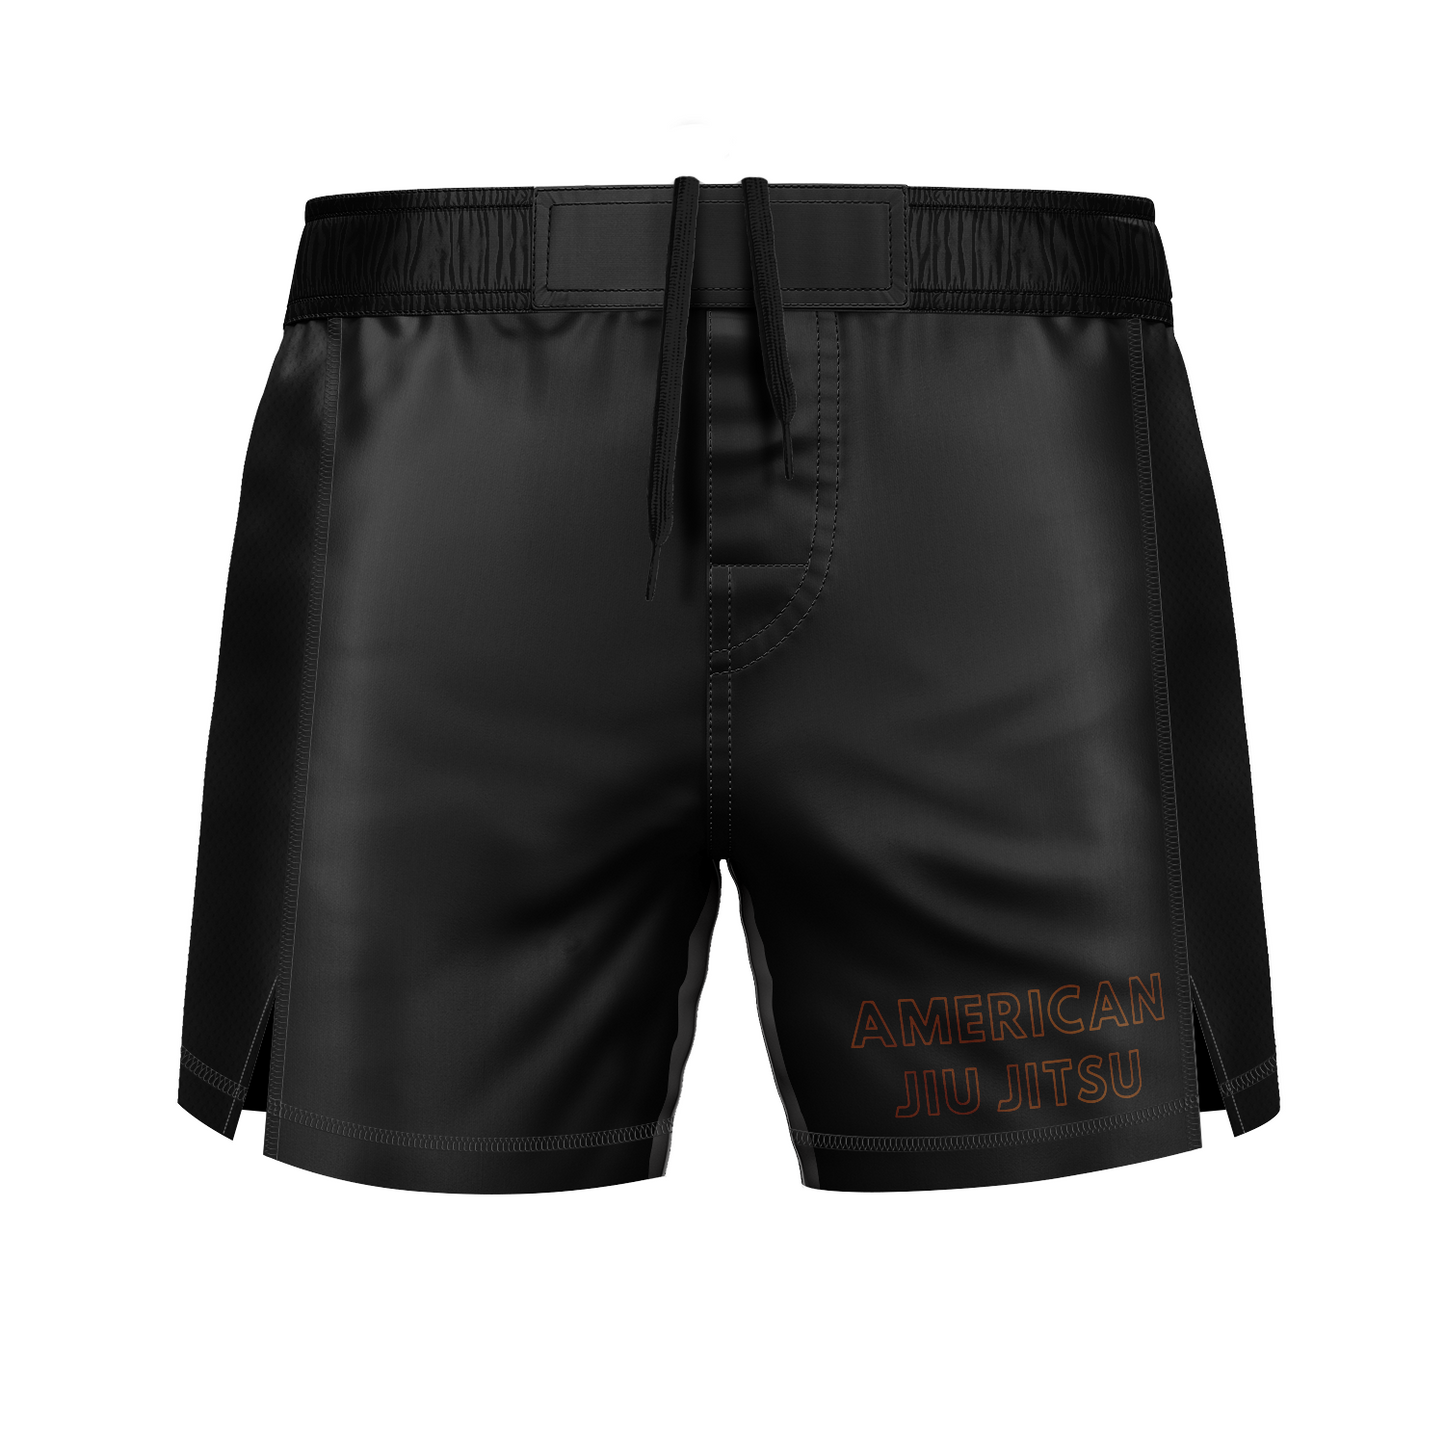 AJJ men's fight shorts The Staple, black and brown